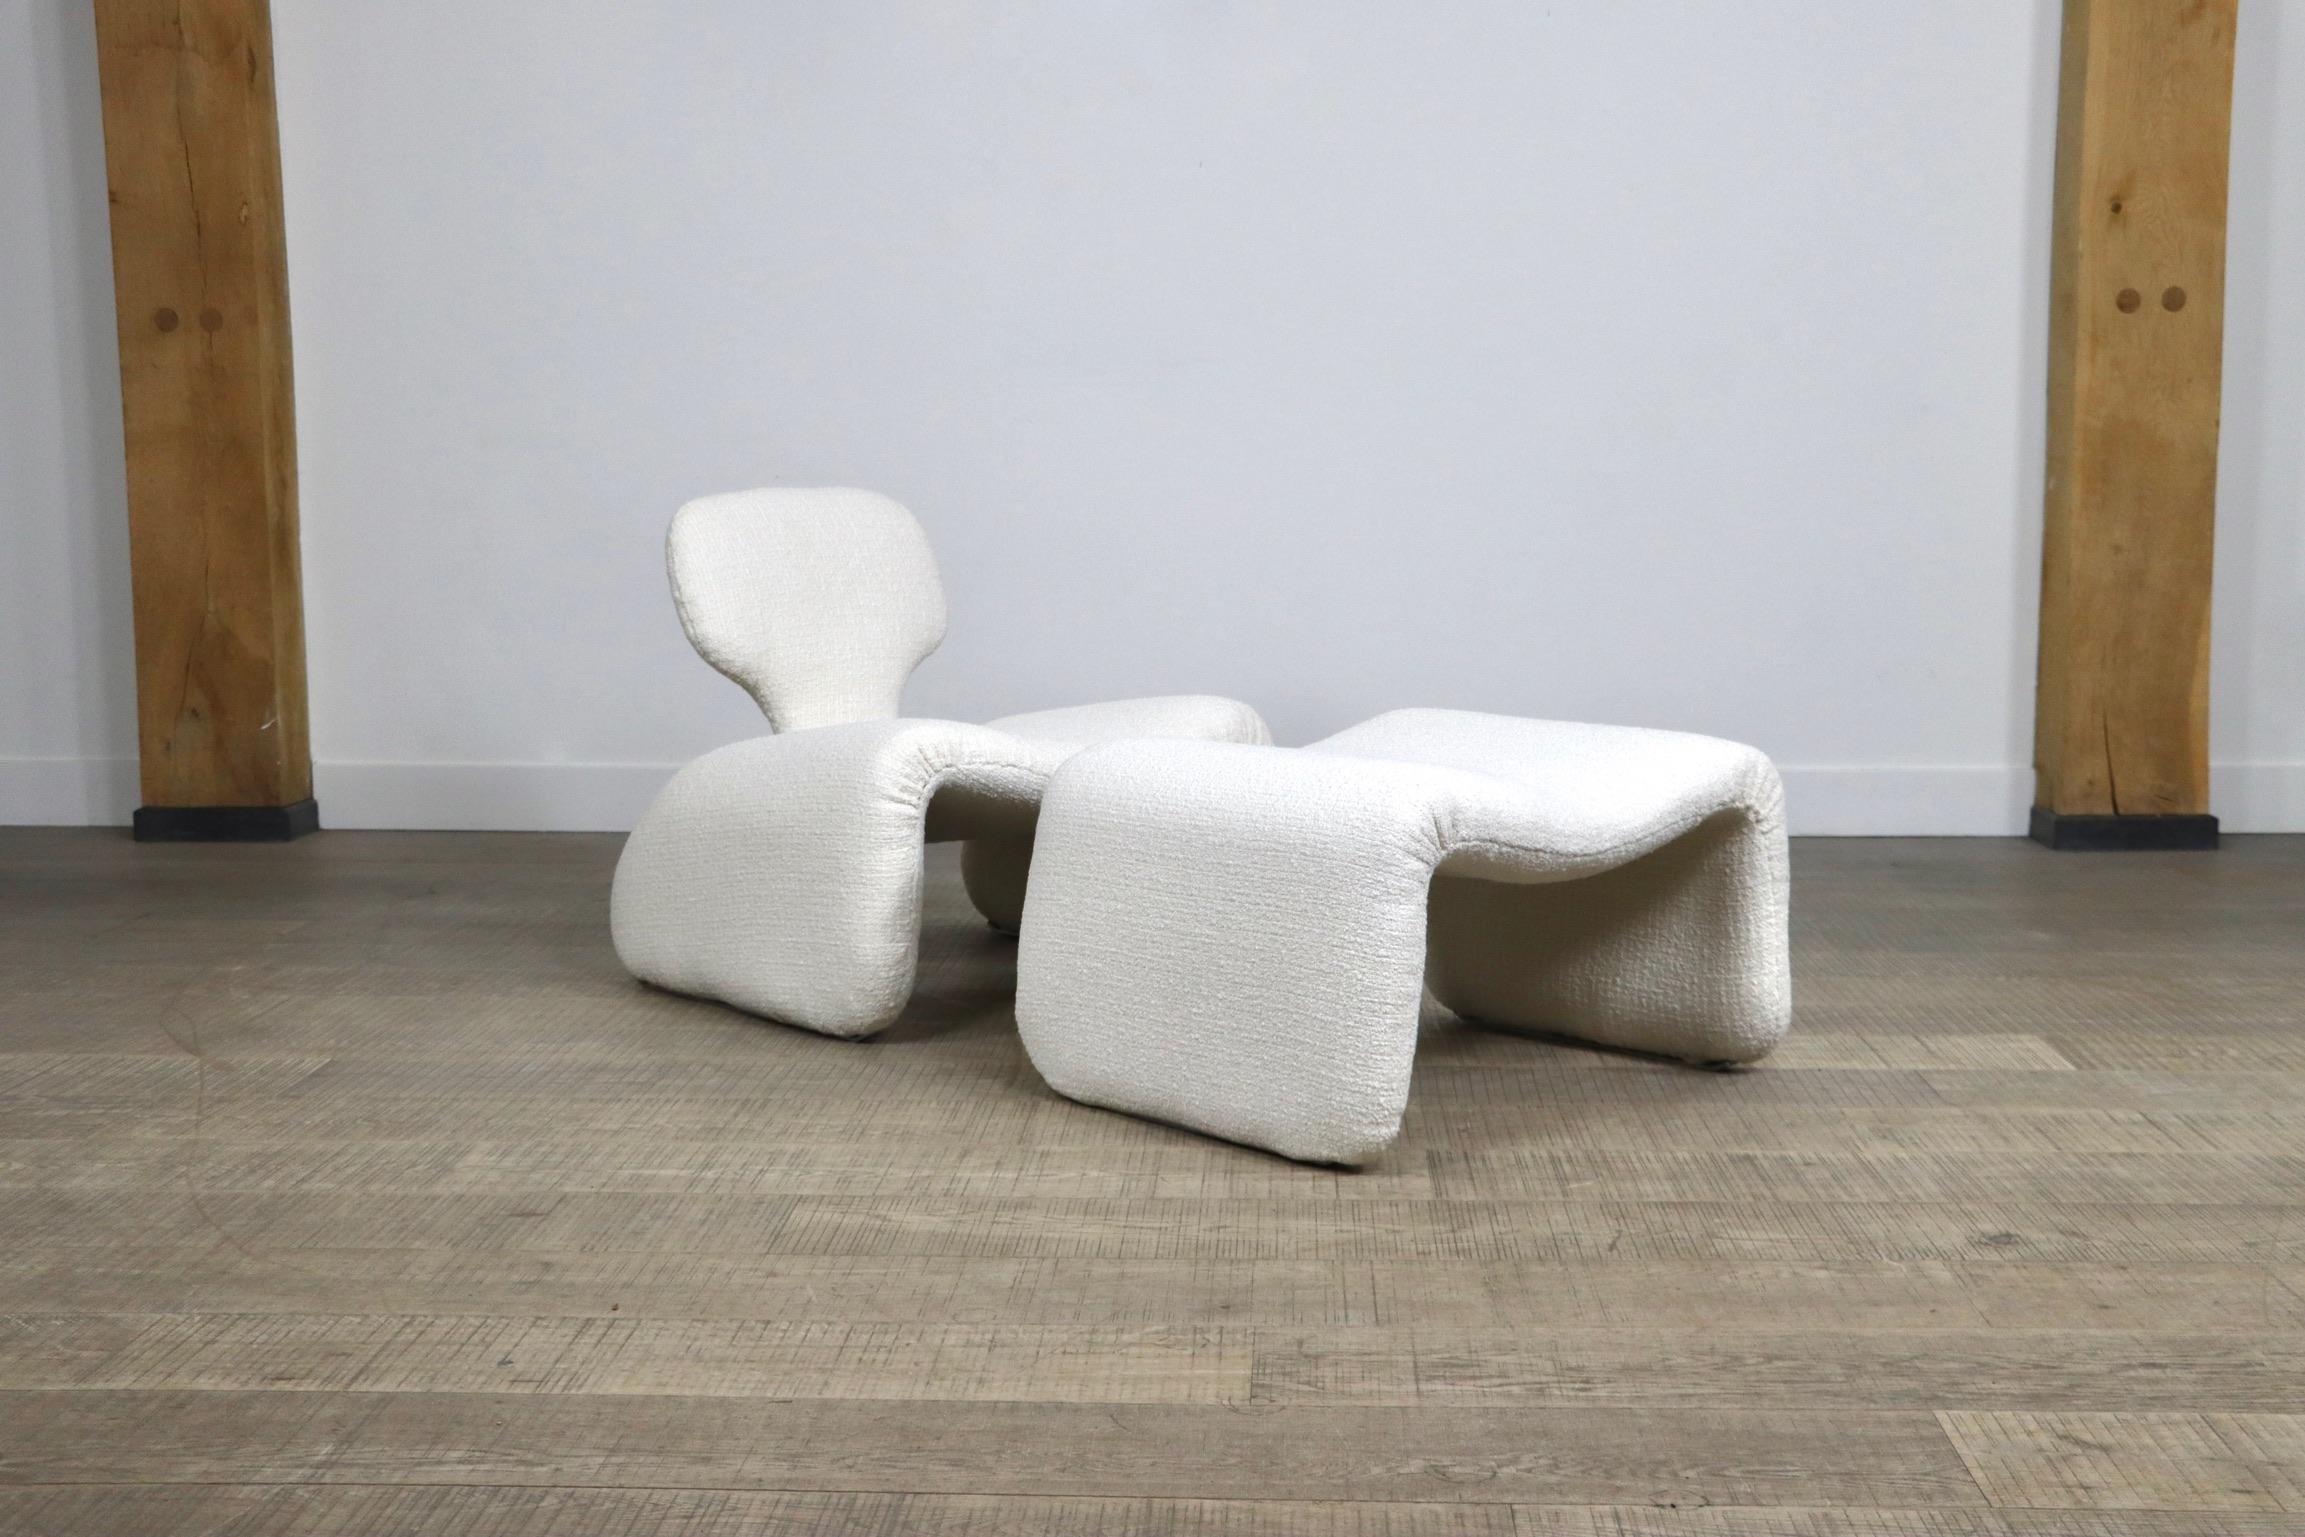 Amazing 'Djinn' Lounge chair with ottoman by Olivier Mourgue currently freshly recovered in a cream boucle fabric. This incredible sculptural design is also highly comfortable! This model can be seen in red upholstery in the movie 2001 Space